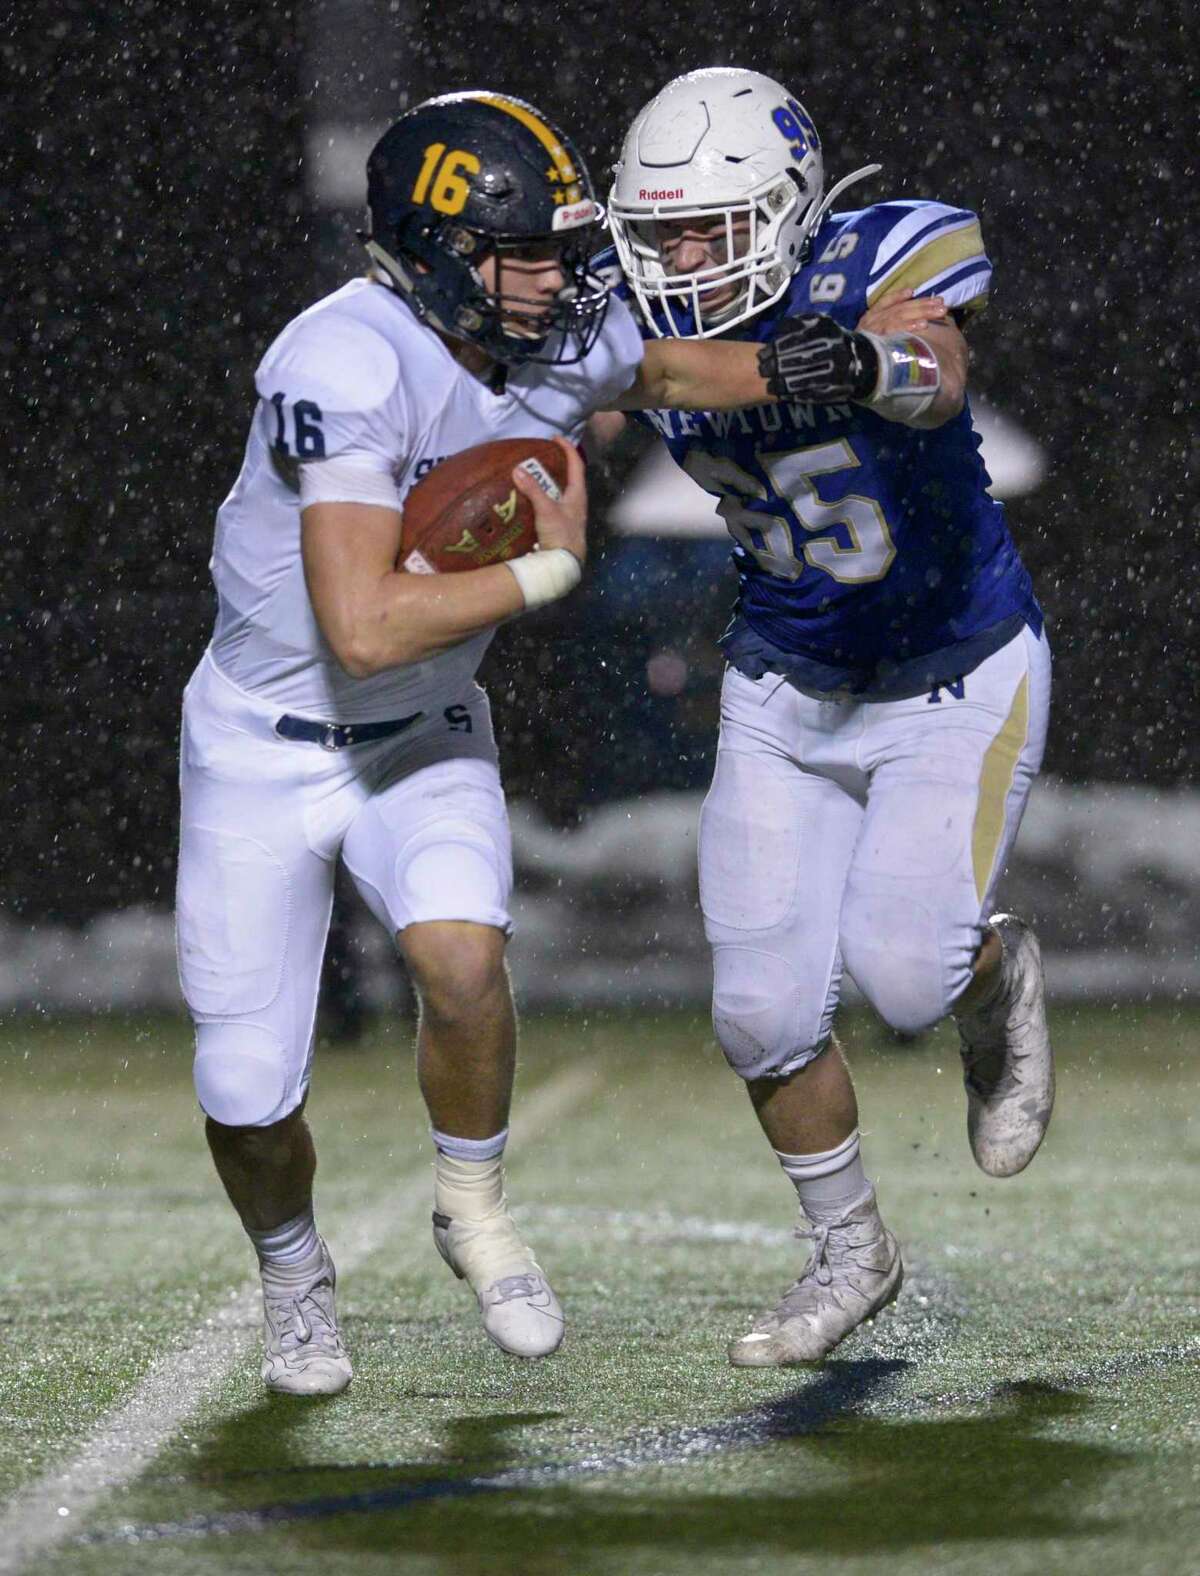 Newtown's James Knox (65) catches Simsbury quarterback Aiden Boeshans (16) in the backfield during the first half of the Class LL State Football semifinal game between No 4 Simsbury and No. 1 Newtown high schools, Monday December 9, 2019, at Newtown High School, Newtown, Conn.